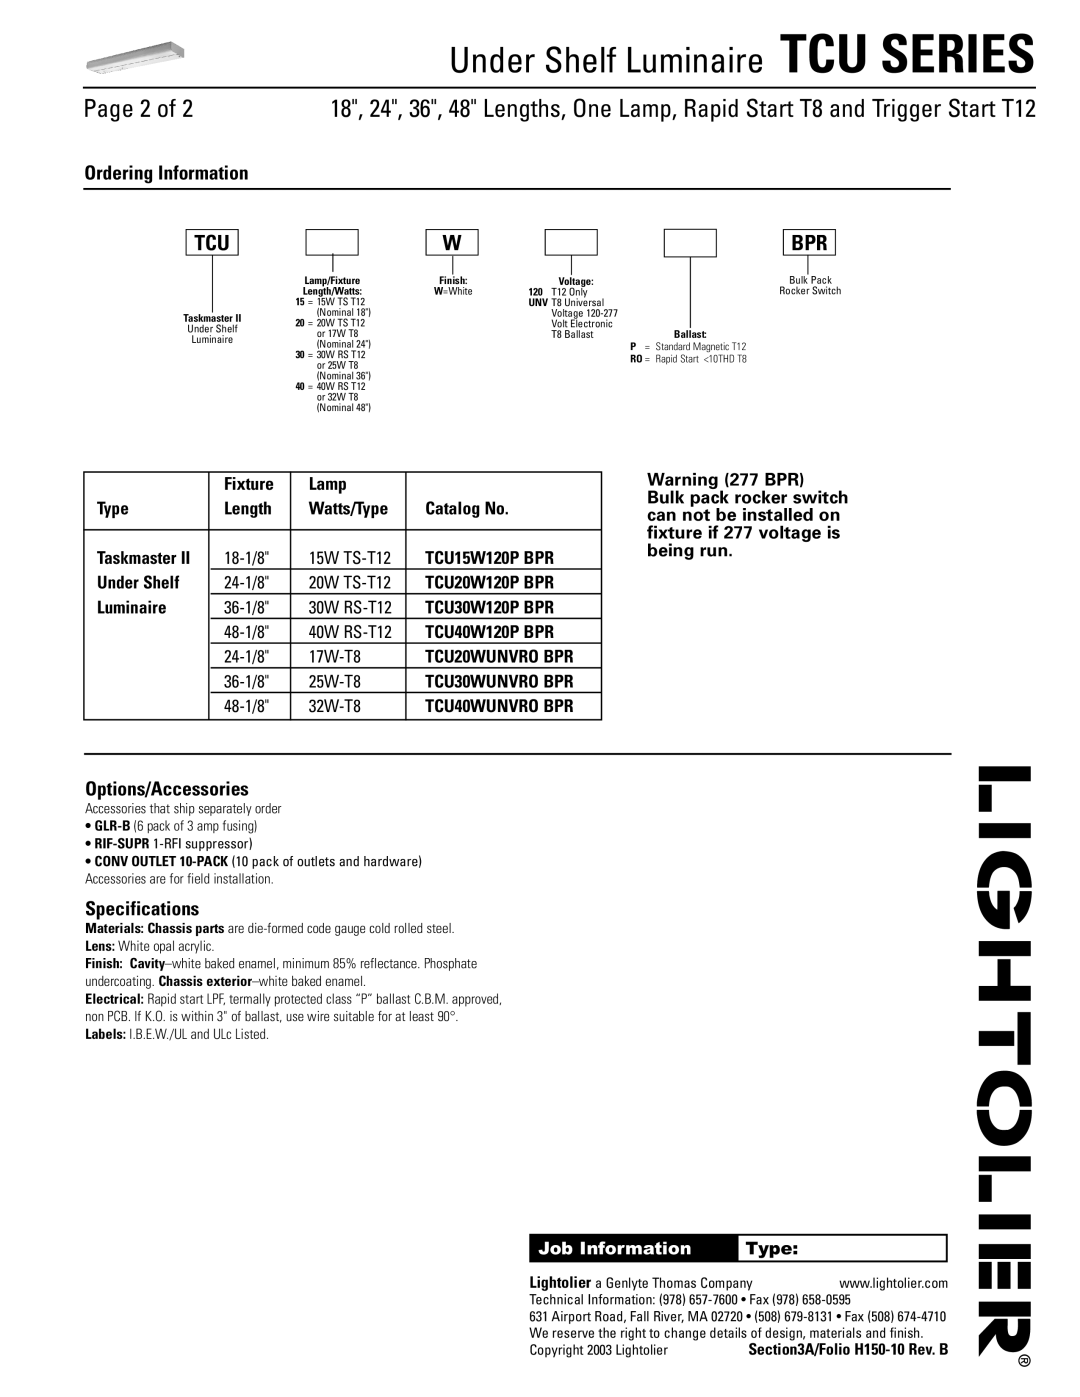 Lightolier TCU Series dimensions Page 2 of, Ordering Information, Options/Accessories, Specifications, Job Information 